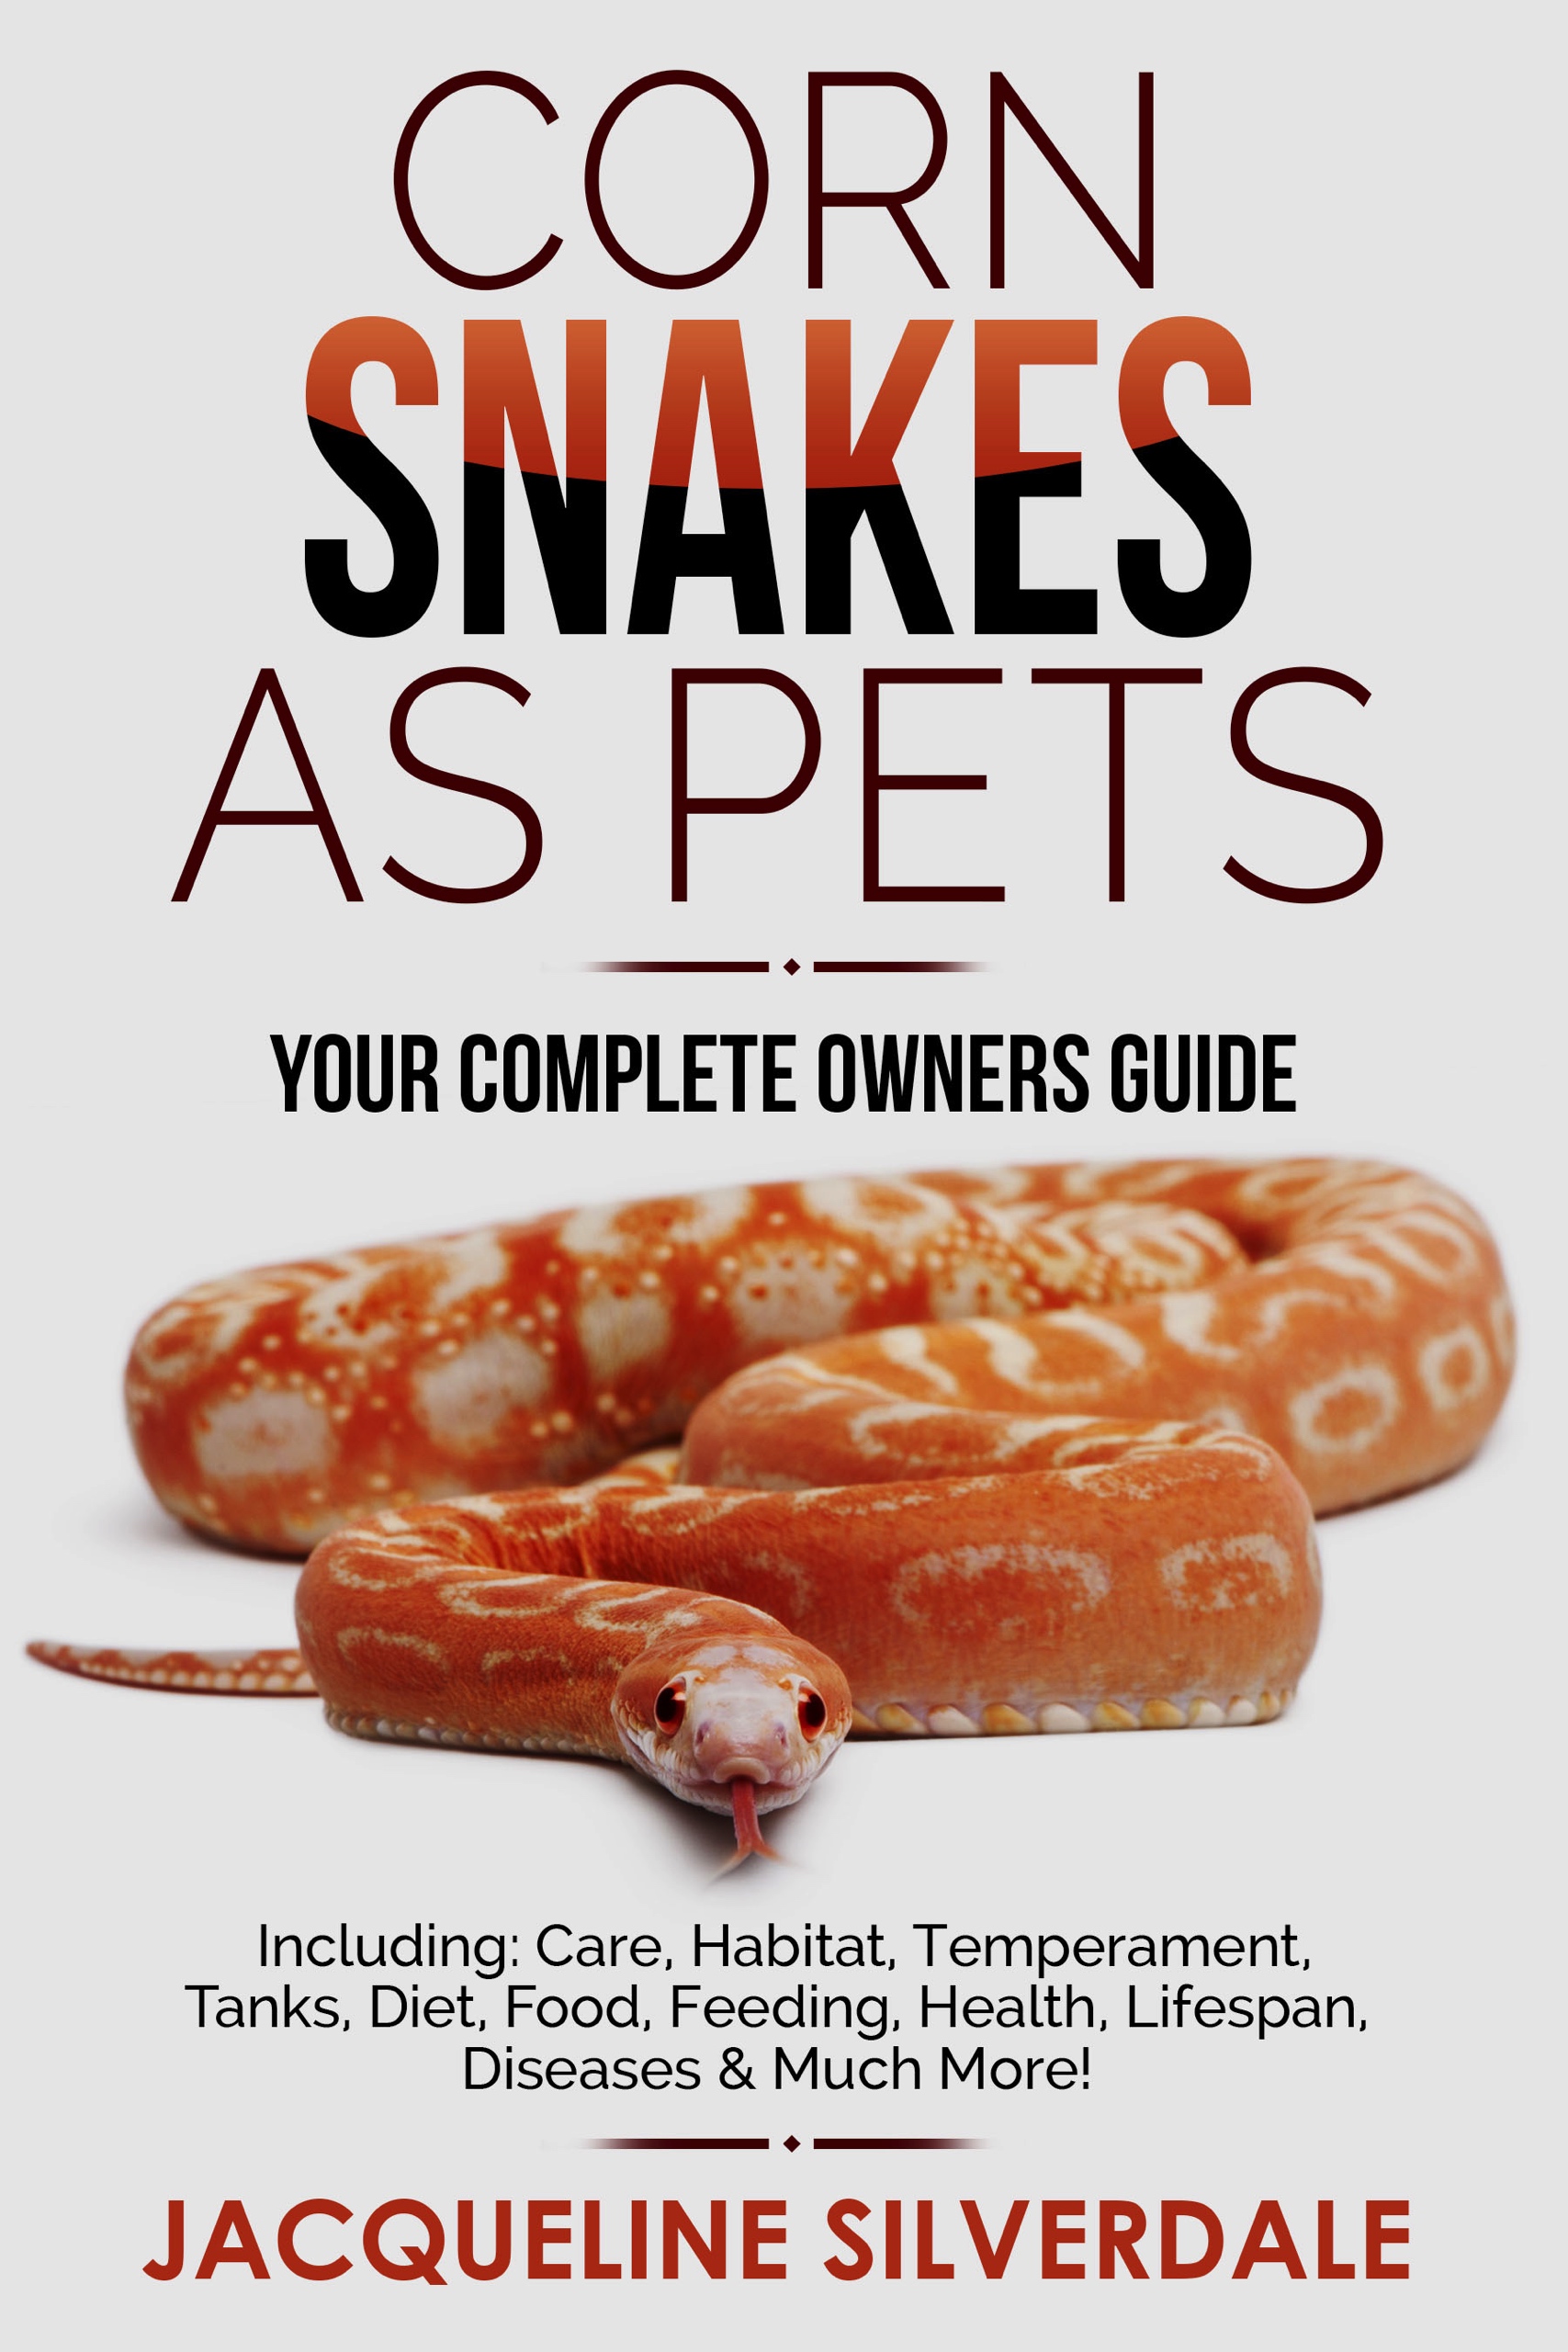 FREE: Corn Snakes as Pets : Your Complete Owners Guide: Including: Care, Habitat, Temperament, Tanks, Diet, Food, Feeding, Health, Lifespan, Diseases and Much More! by Jacqueline Silverdale